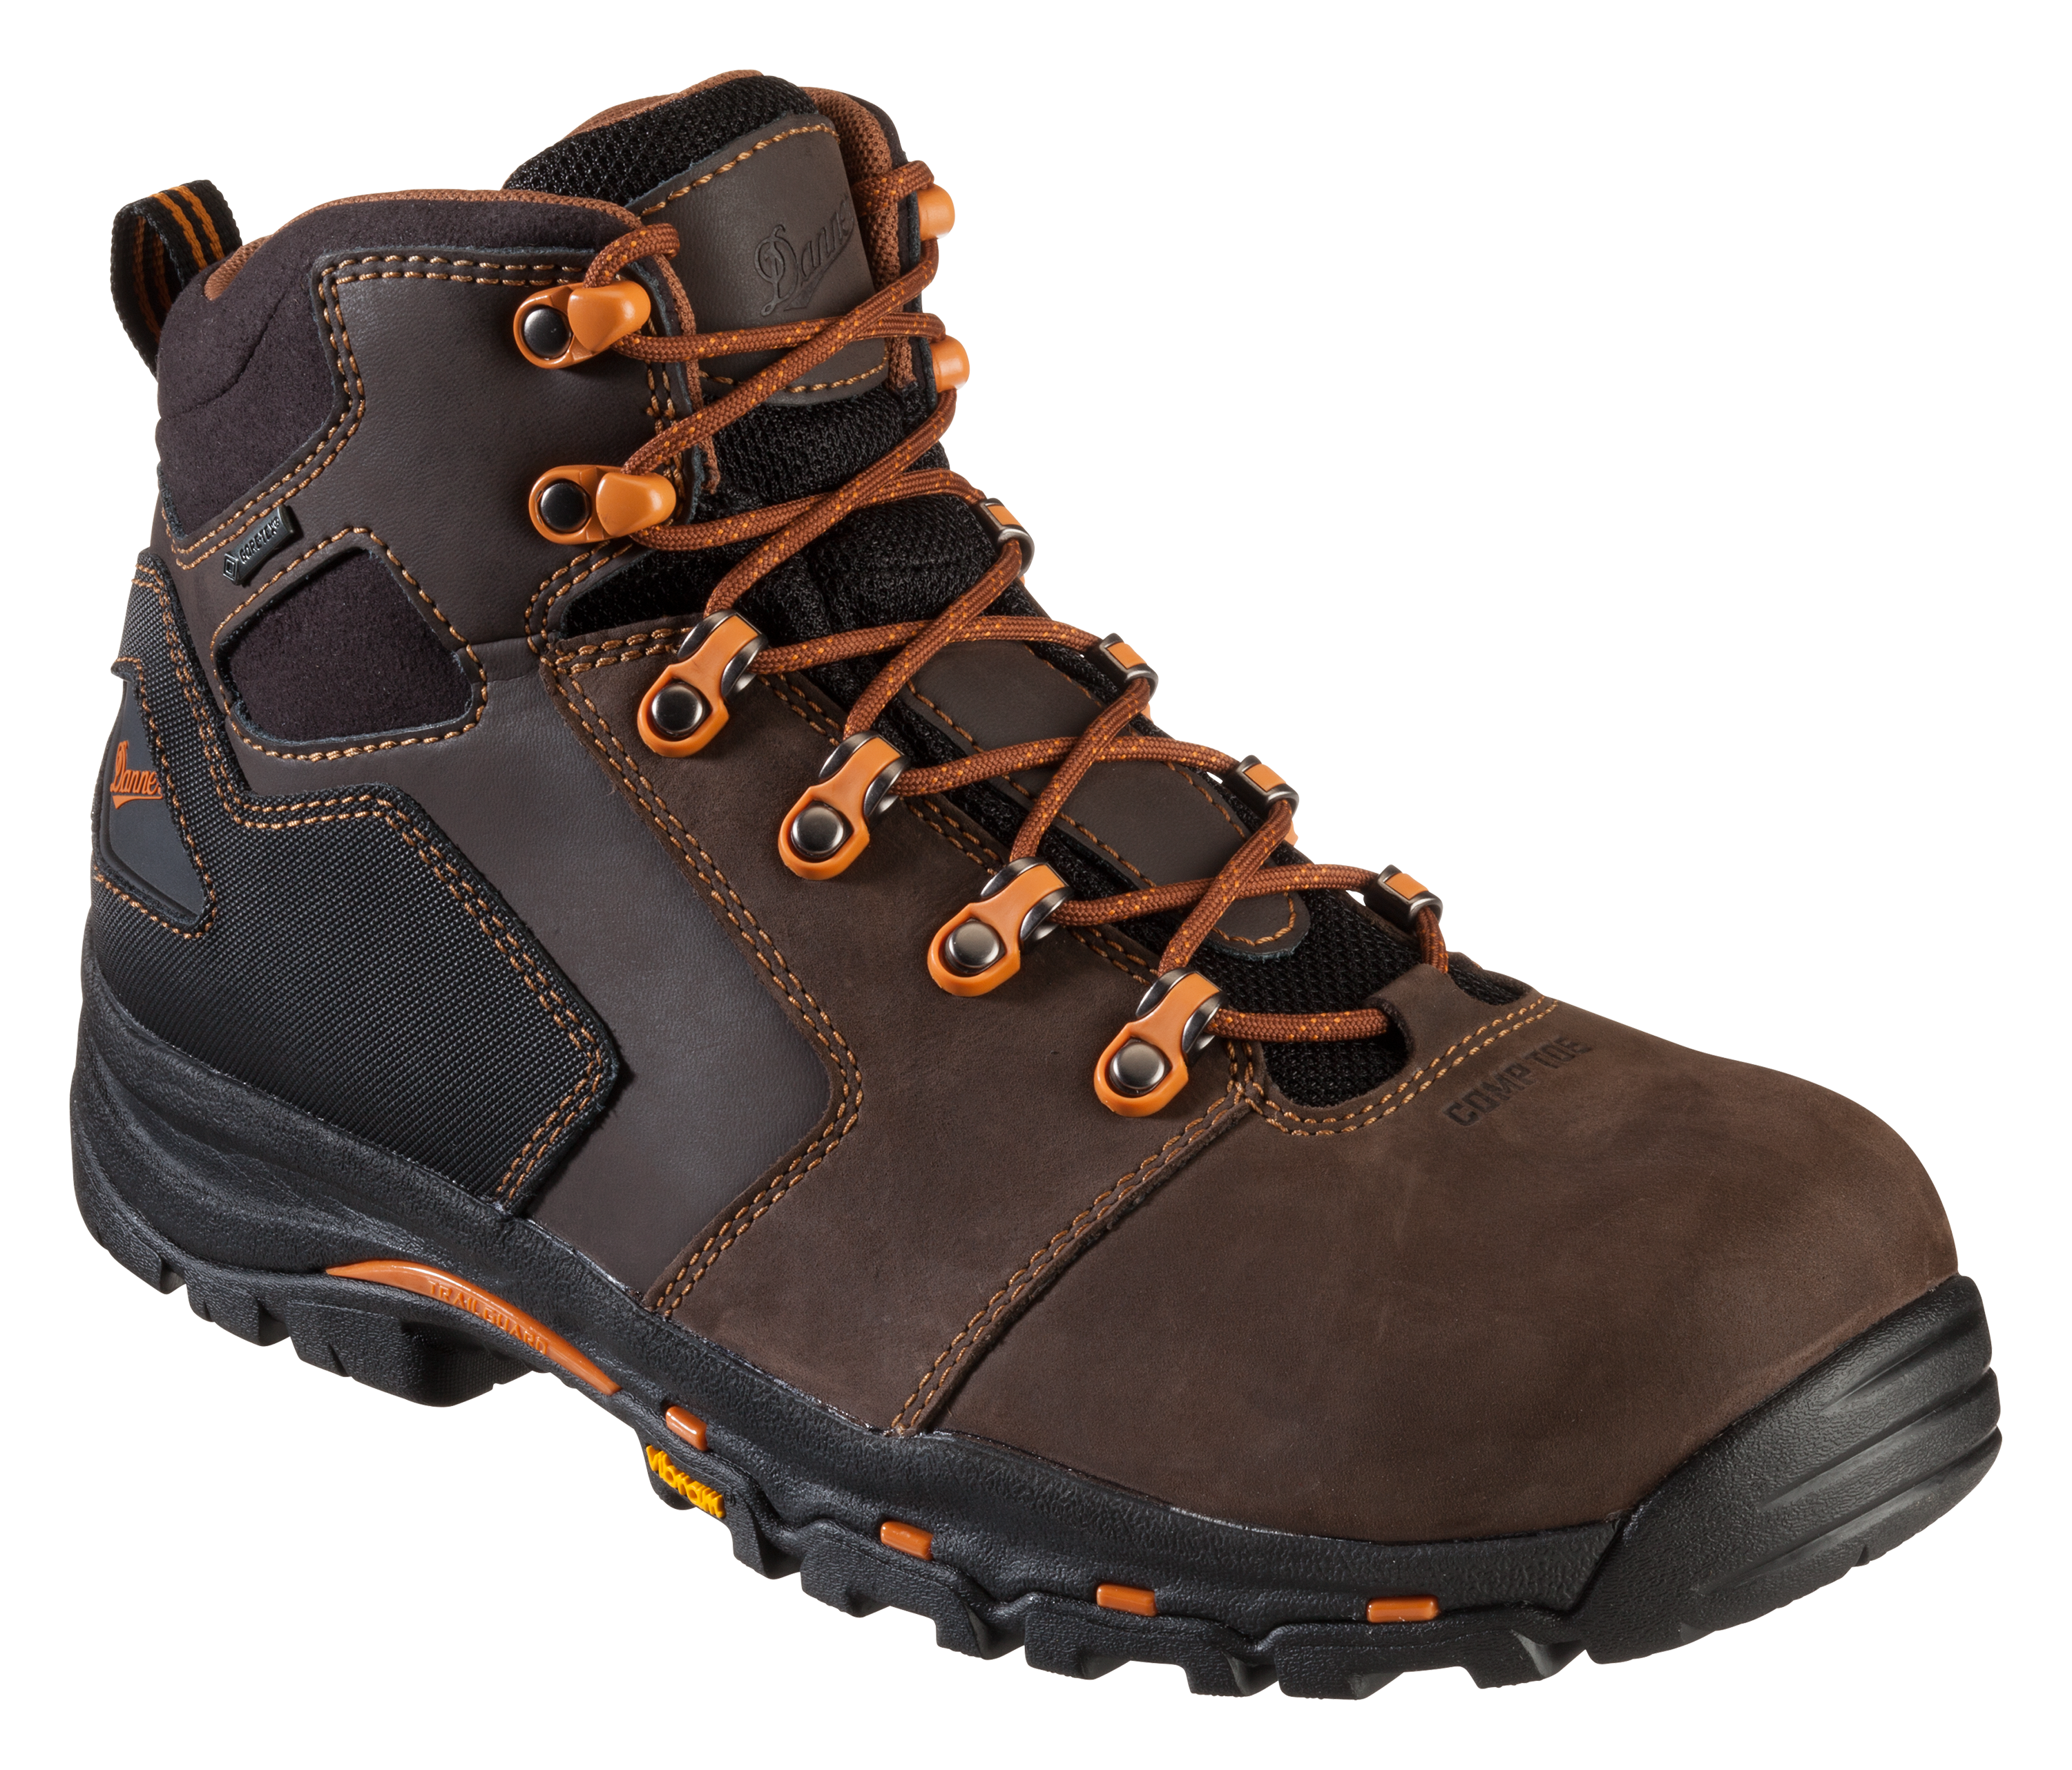 Danner Vicious GORE-TEX Non-Metallic Safety Toe Work Boots for Men - Brown - 7M